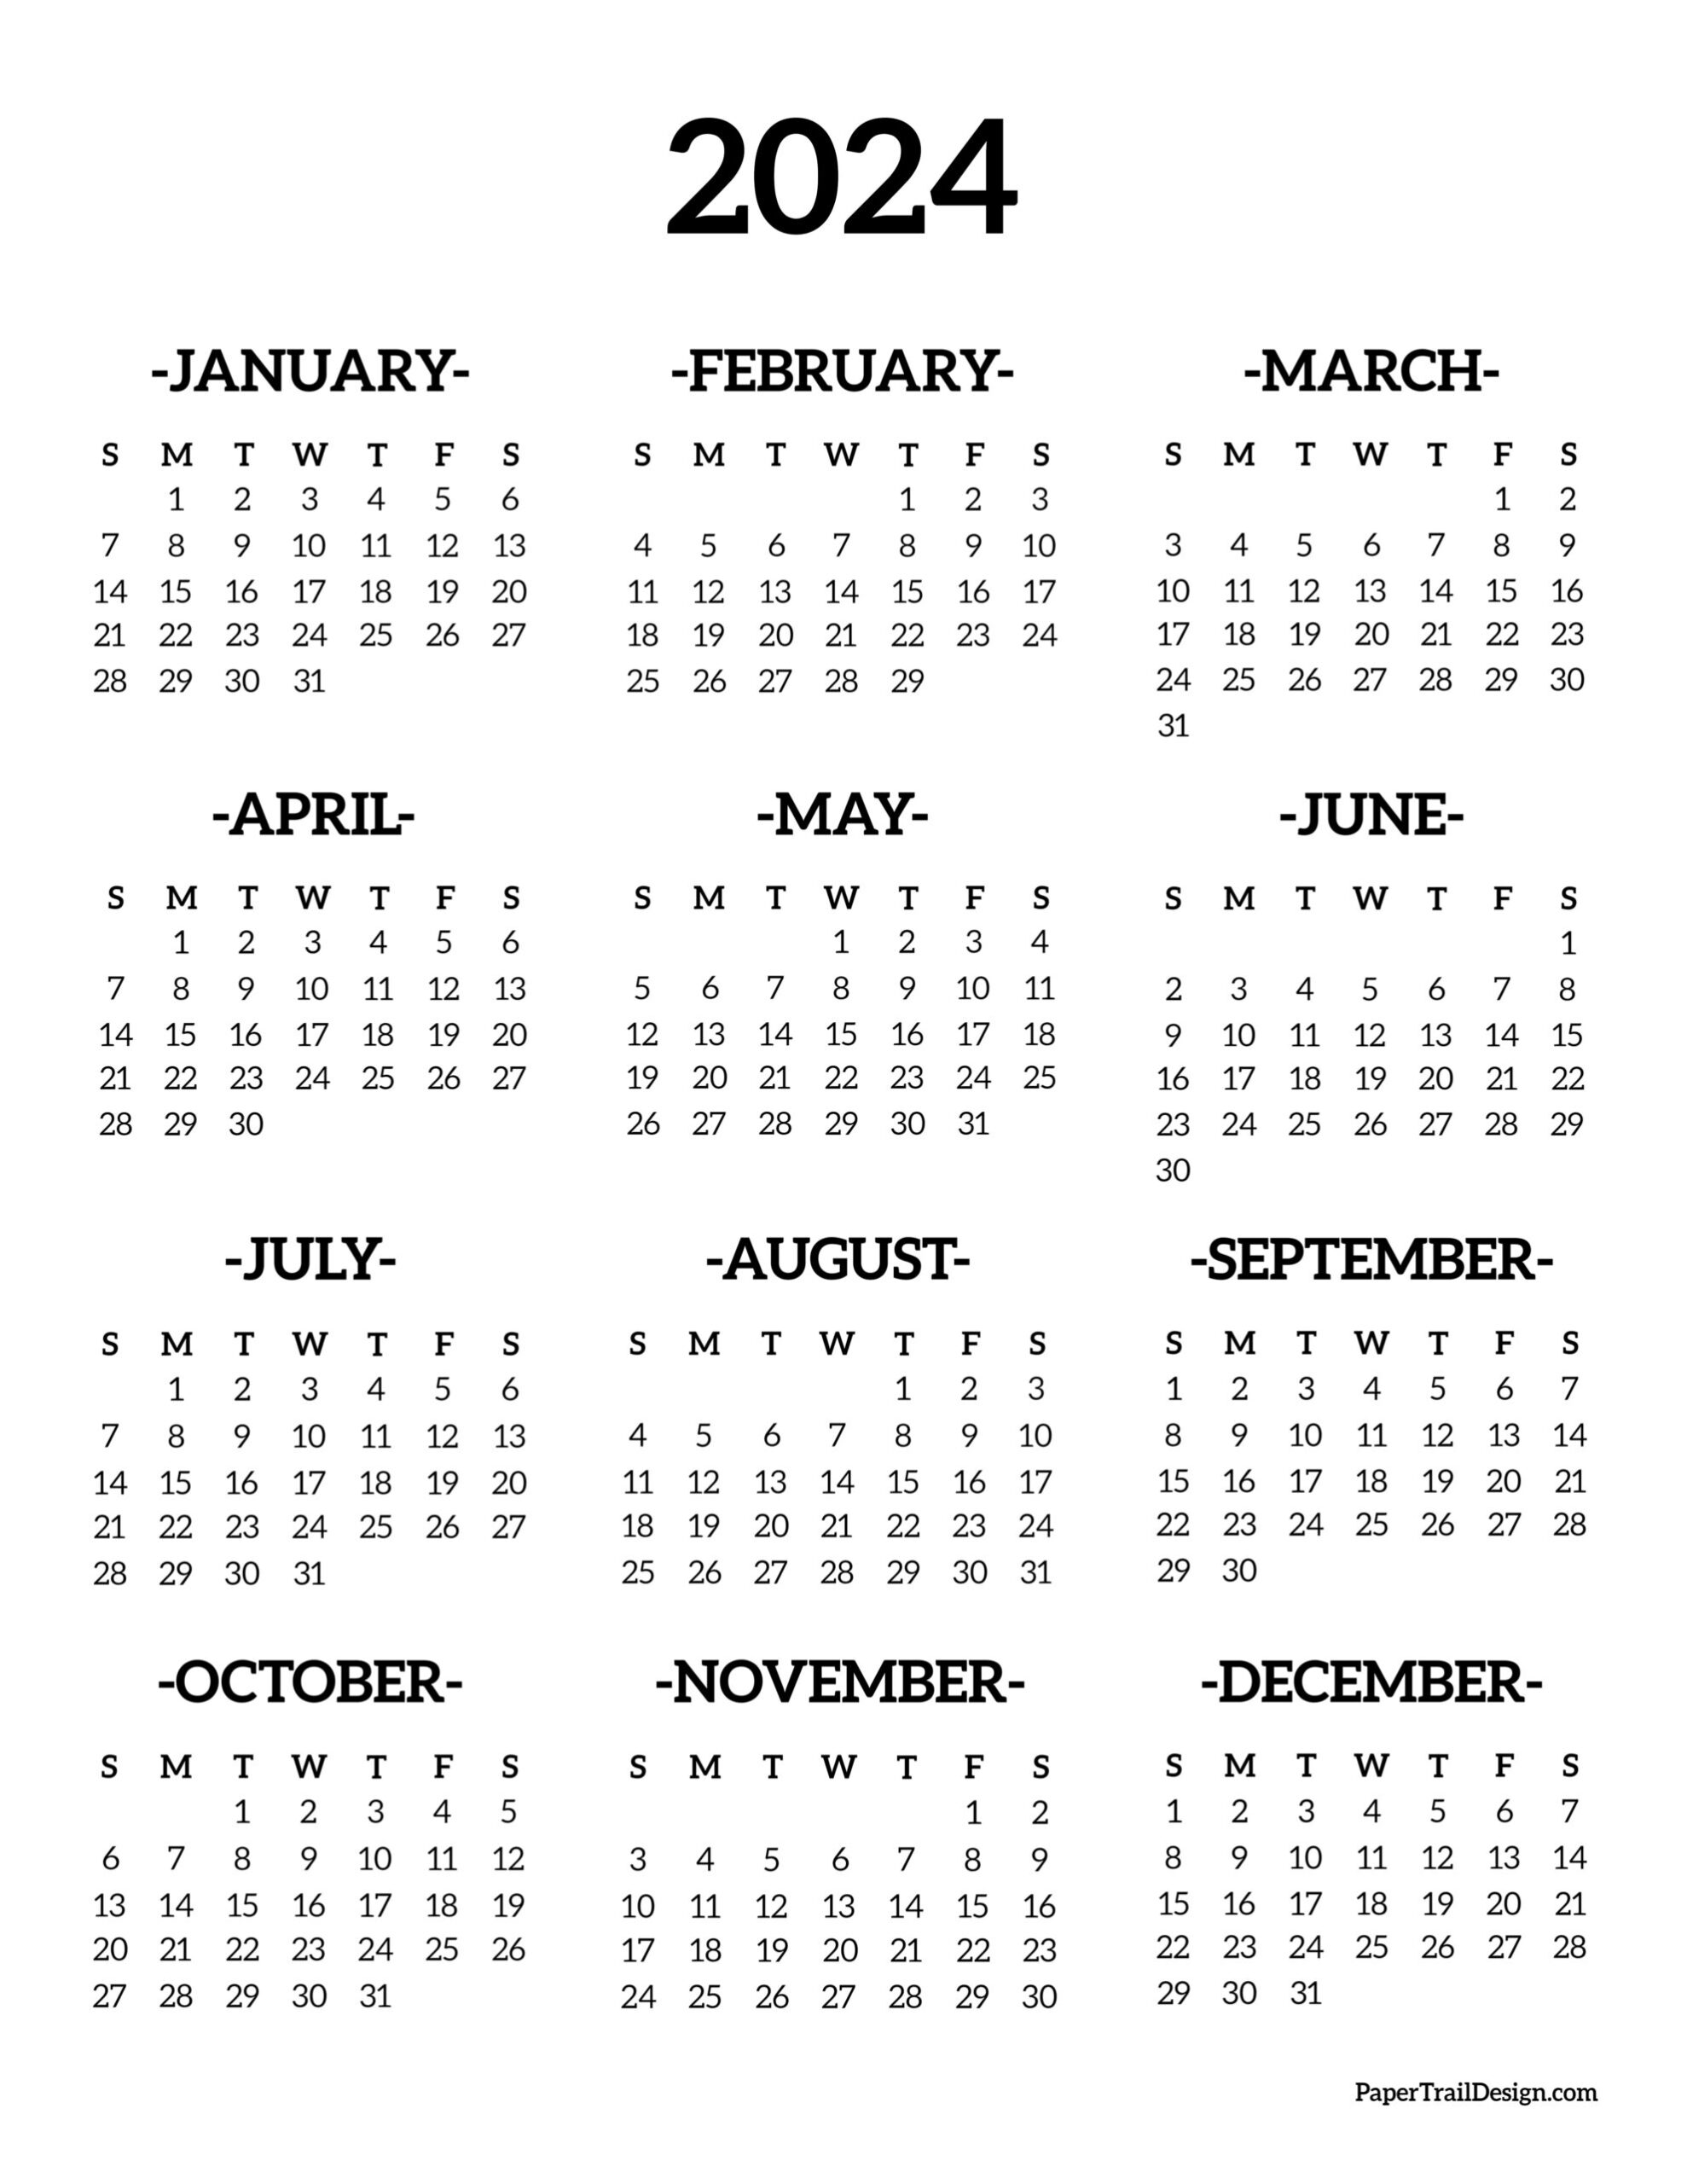 Calendar 2024 Printable One Page - Paper Trail Design for Yearly Calendar 2024 Printable